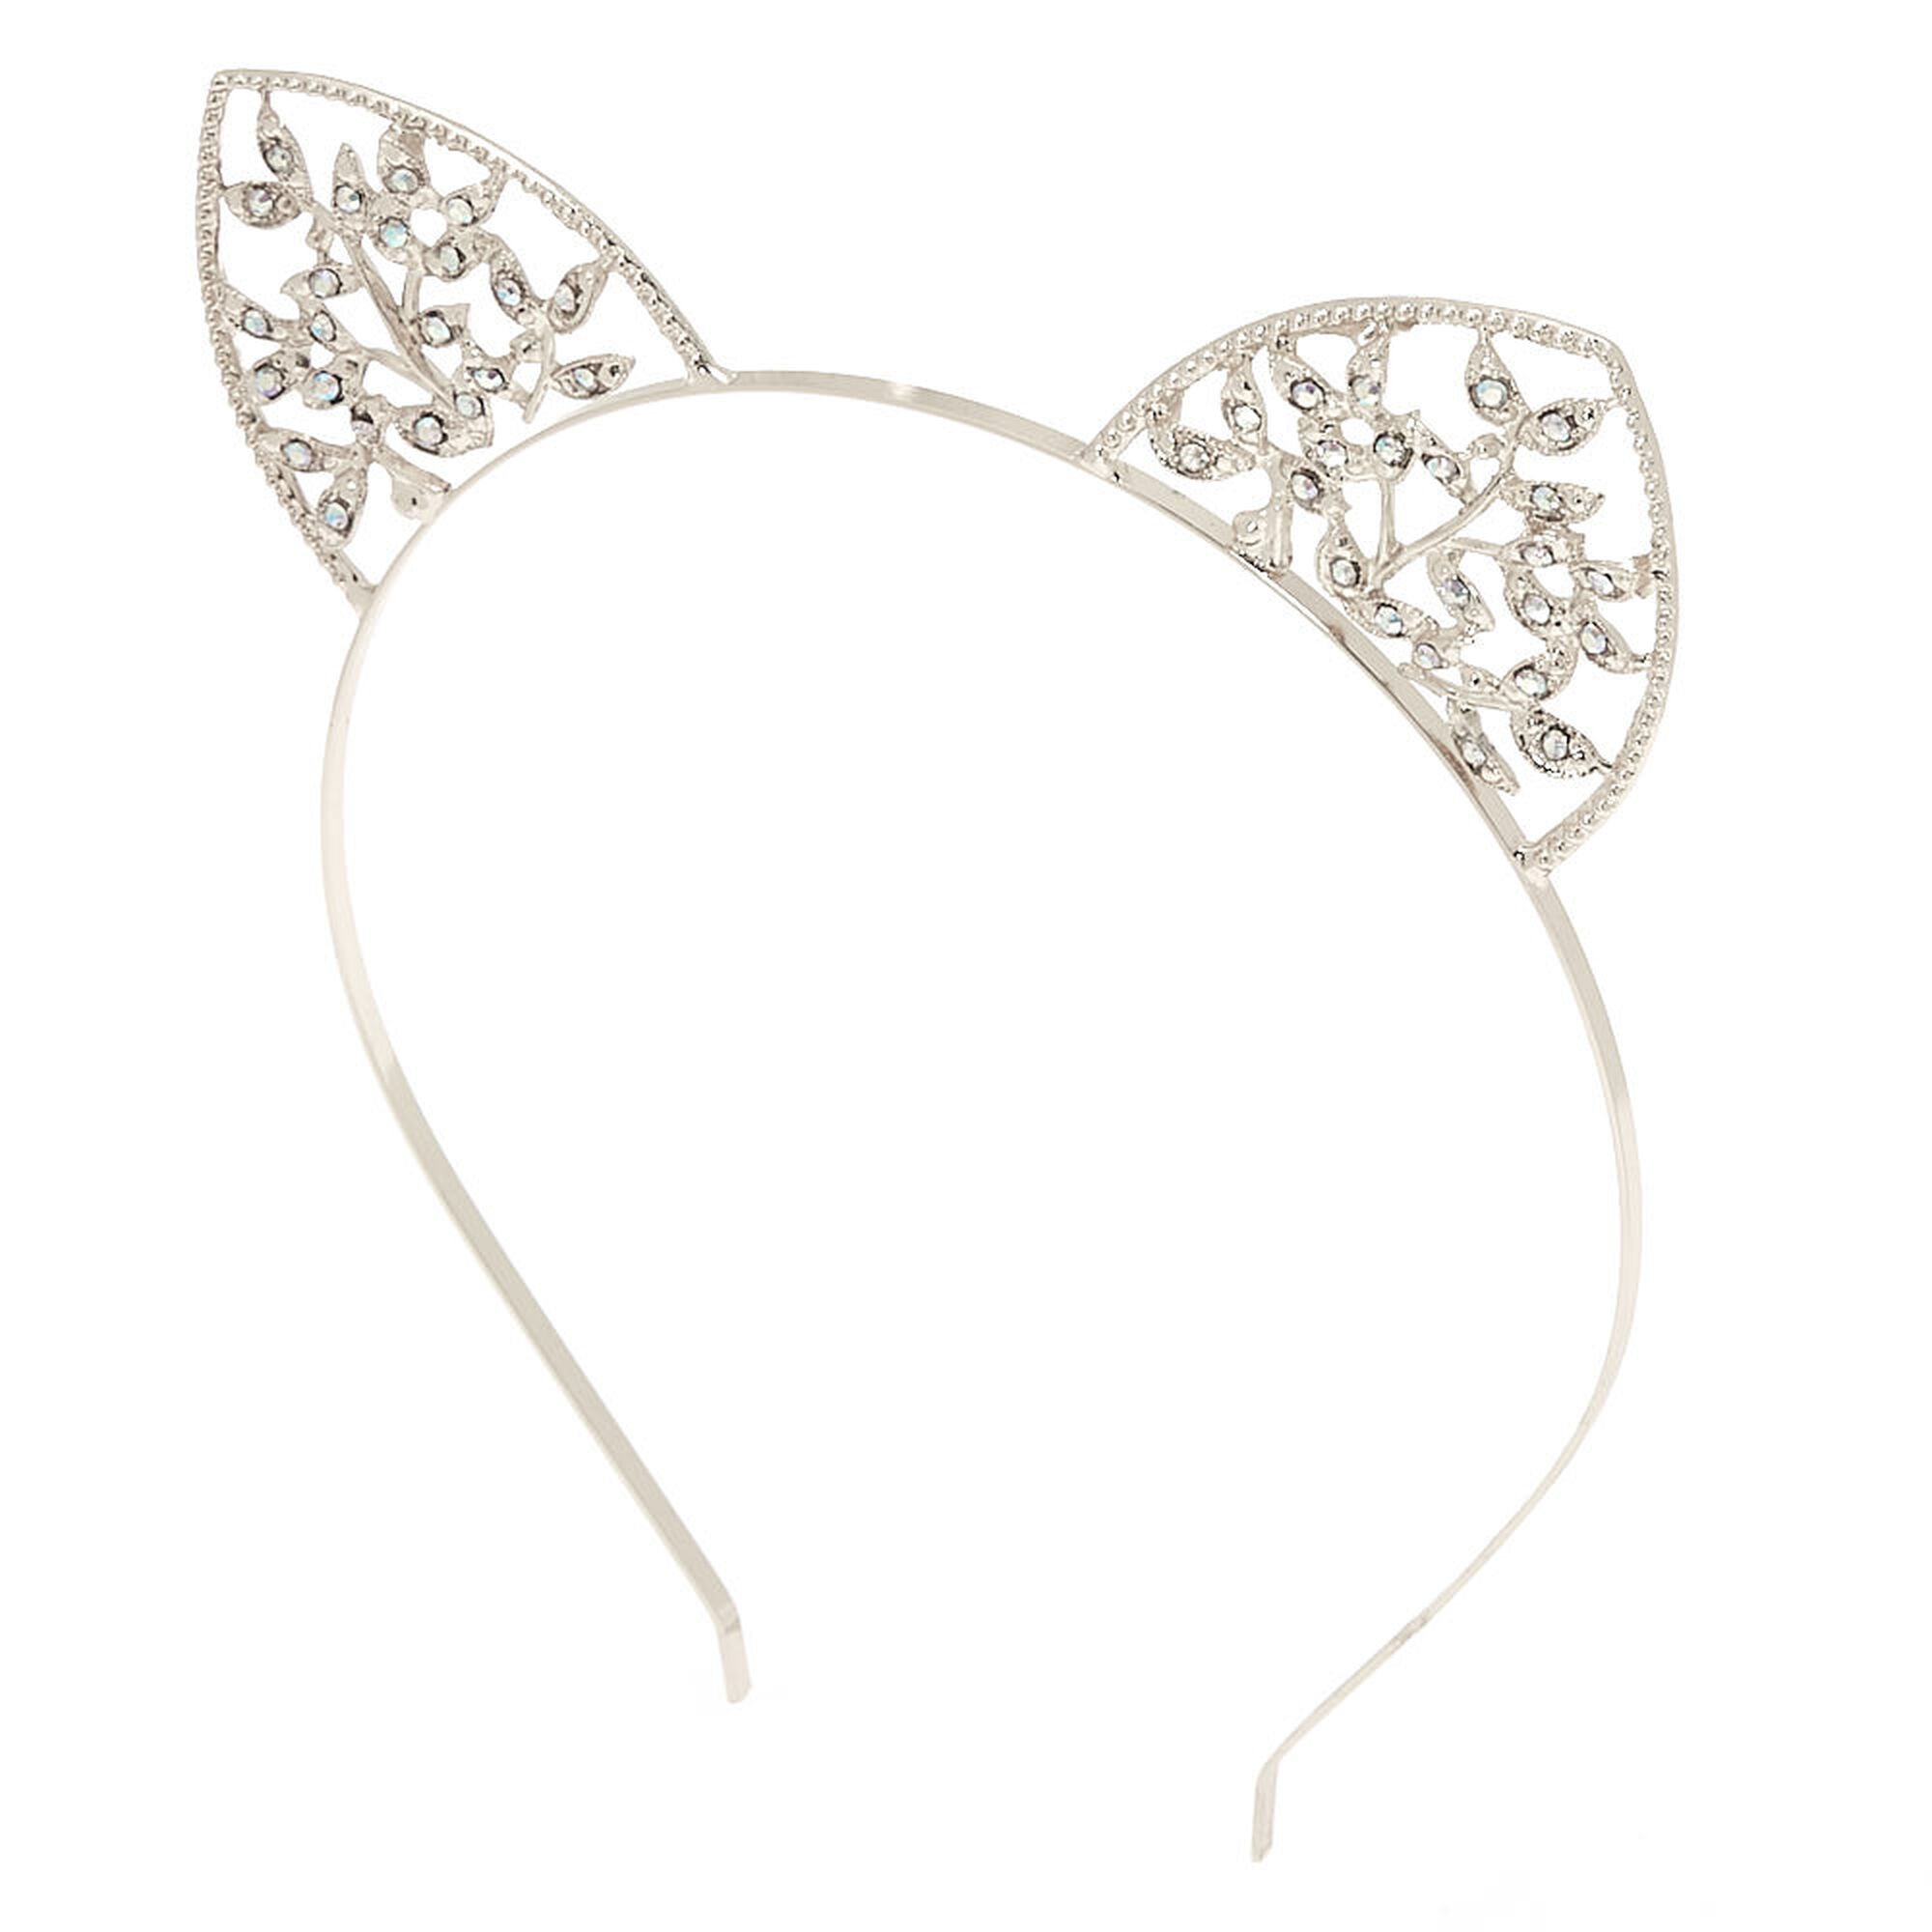 View Claires Ivy Cat Ears Headband Silver information